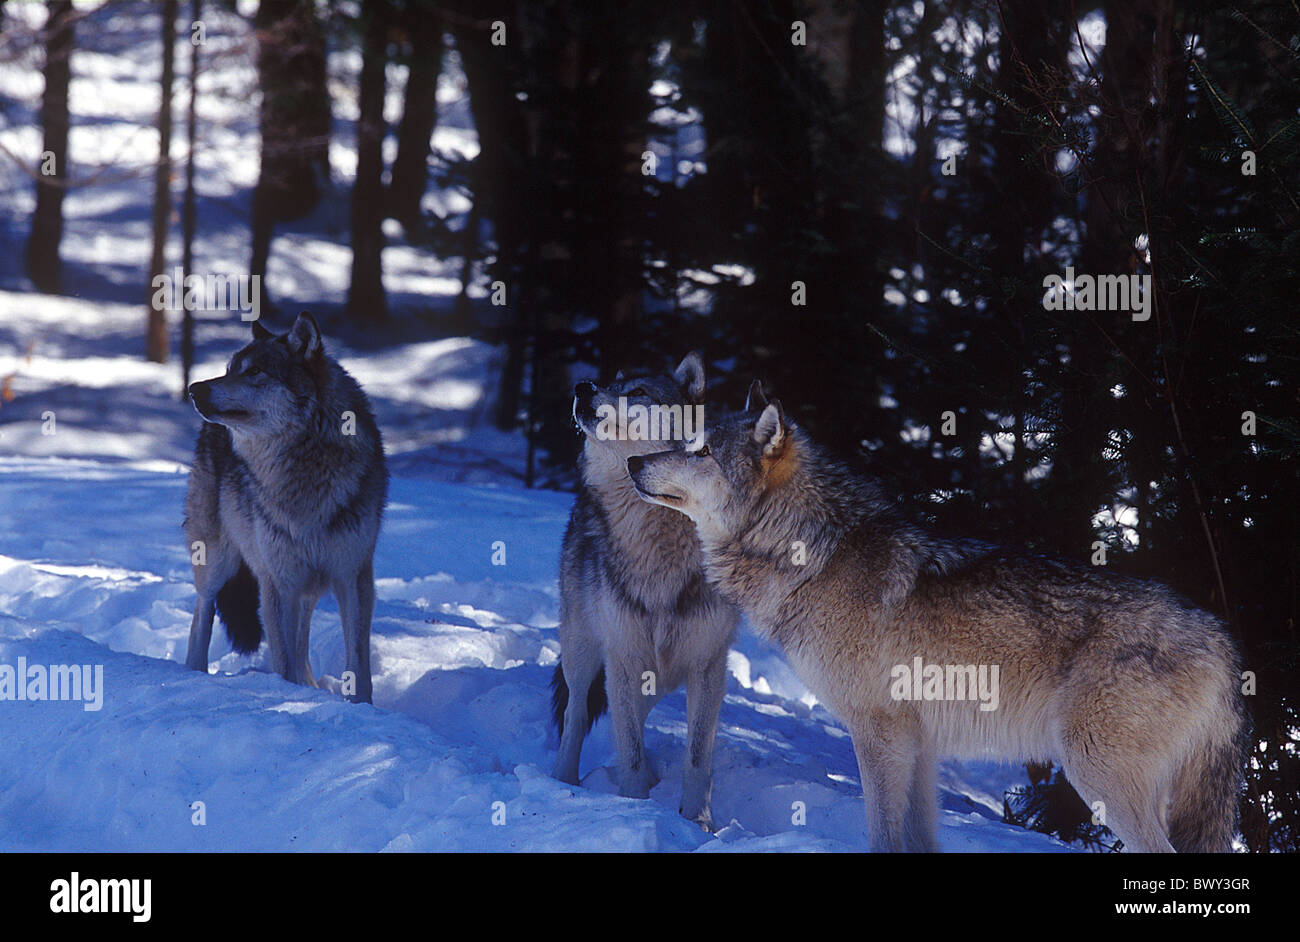 Amos animal animals Canada North America America Canis lupus herds Province of Quebec Refuge Pageau snow Stock Photo